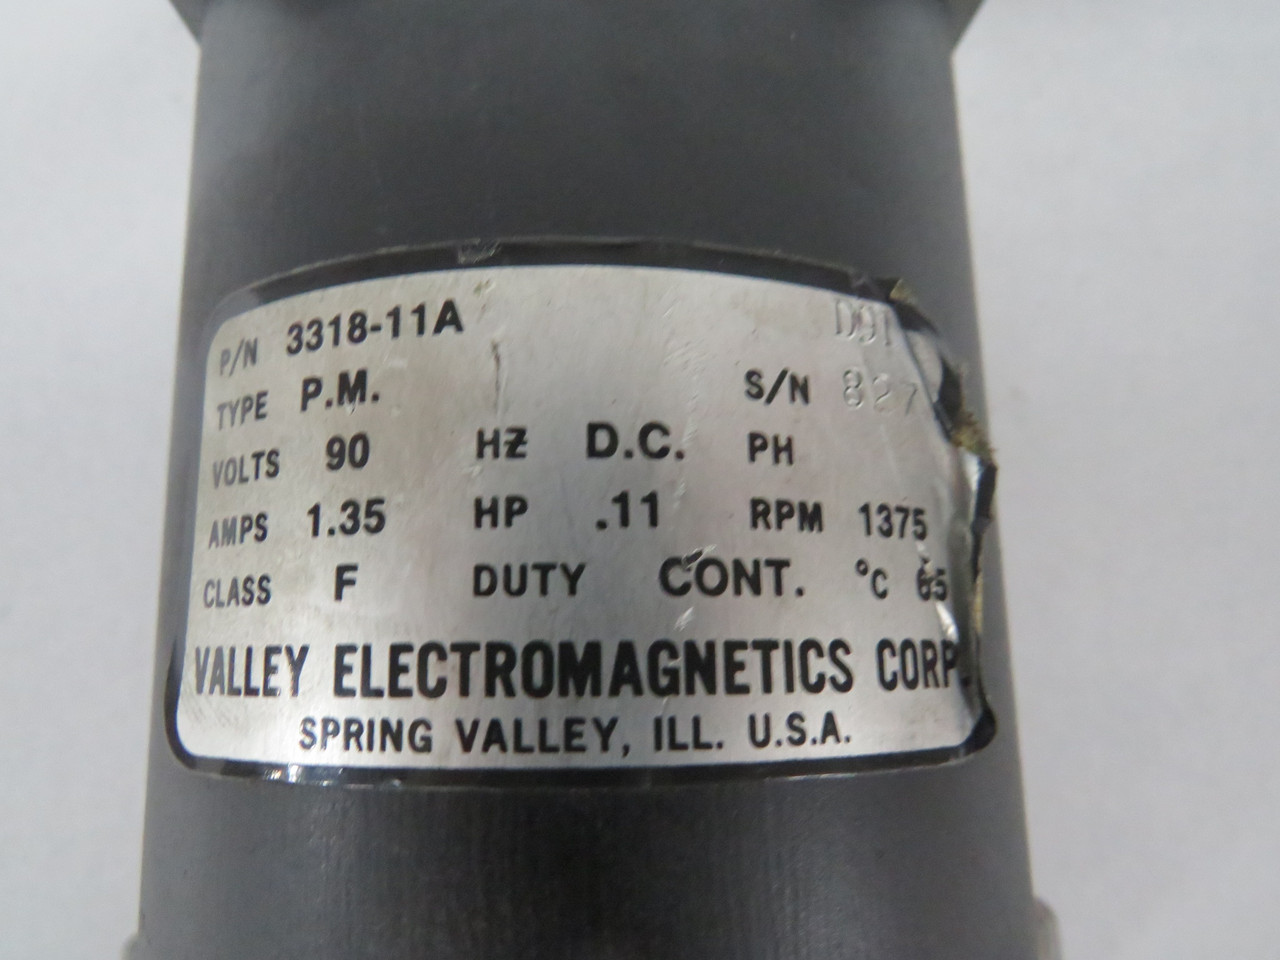 Valley Electromagnetics Corp 3318-11A Motor 0.11HP 1375RPM 90VDC 1.35A USED